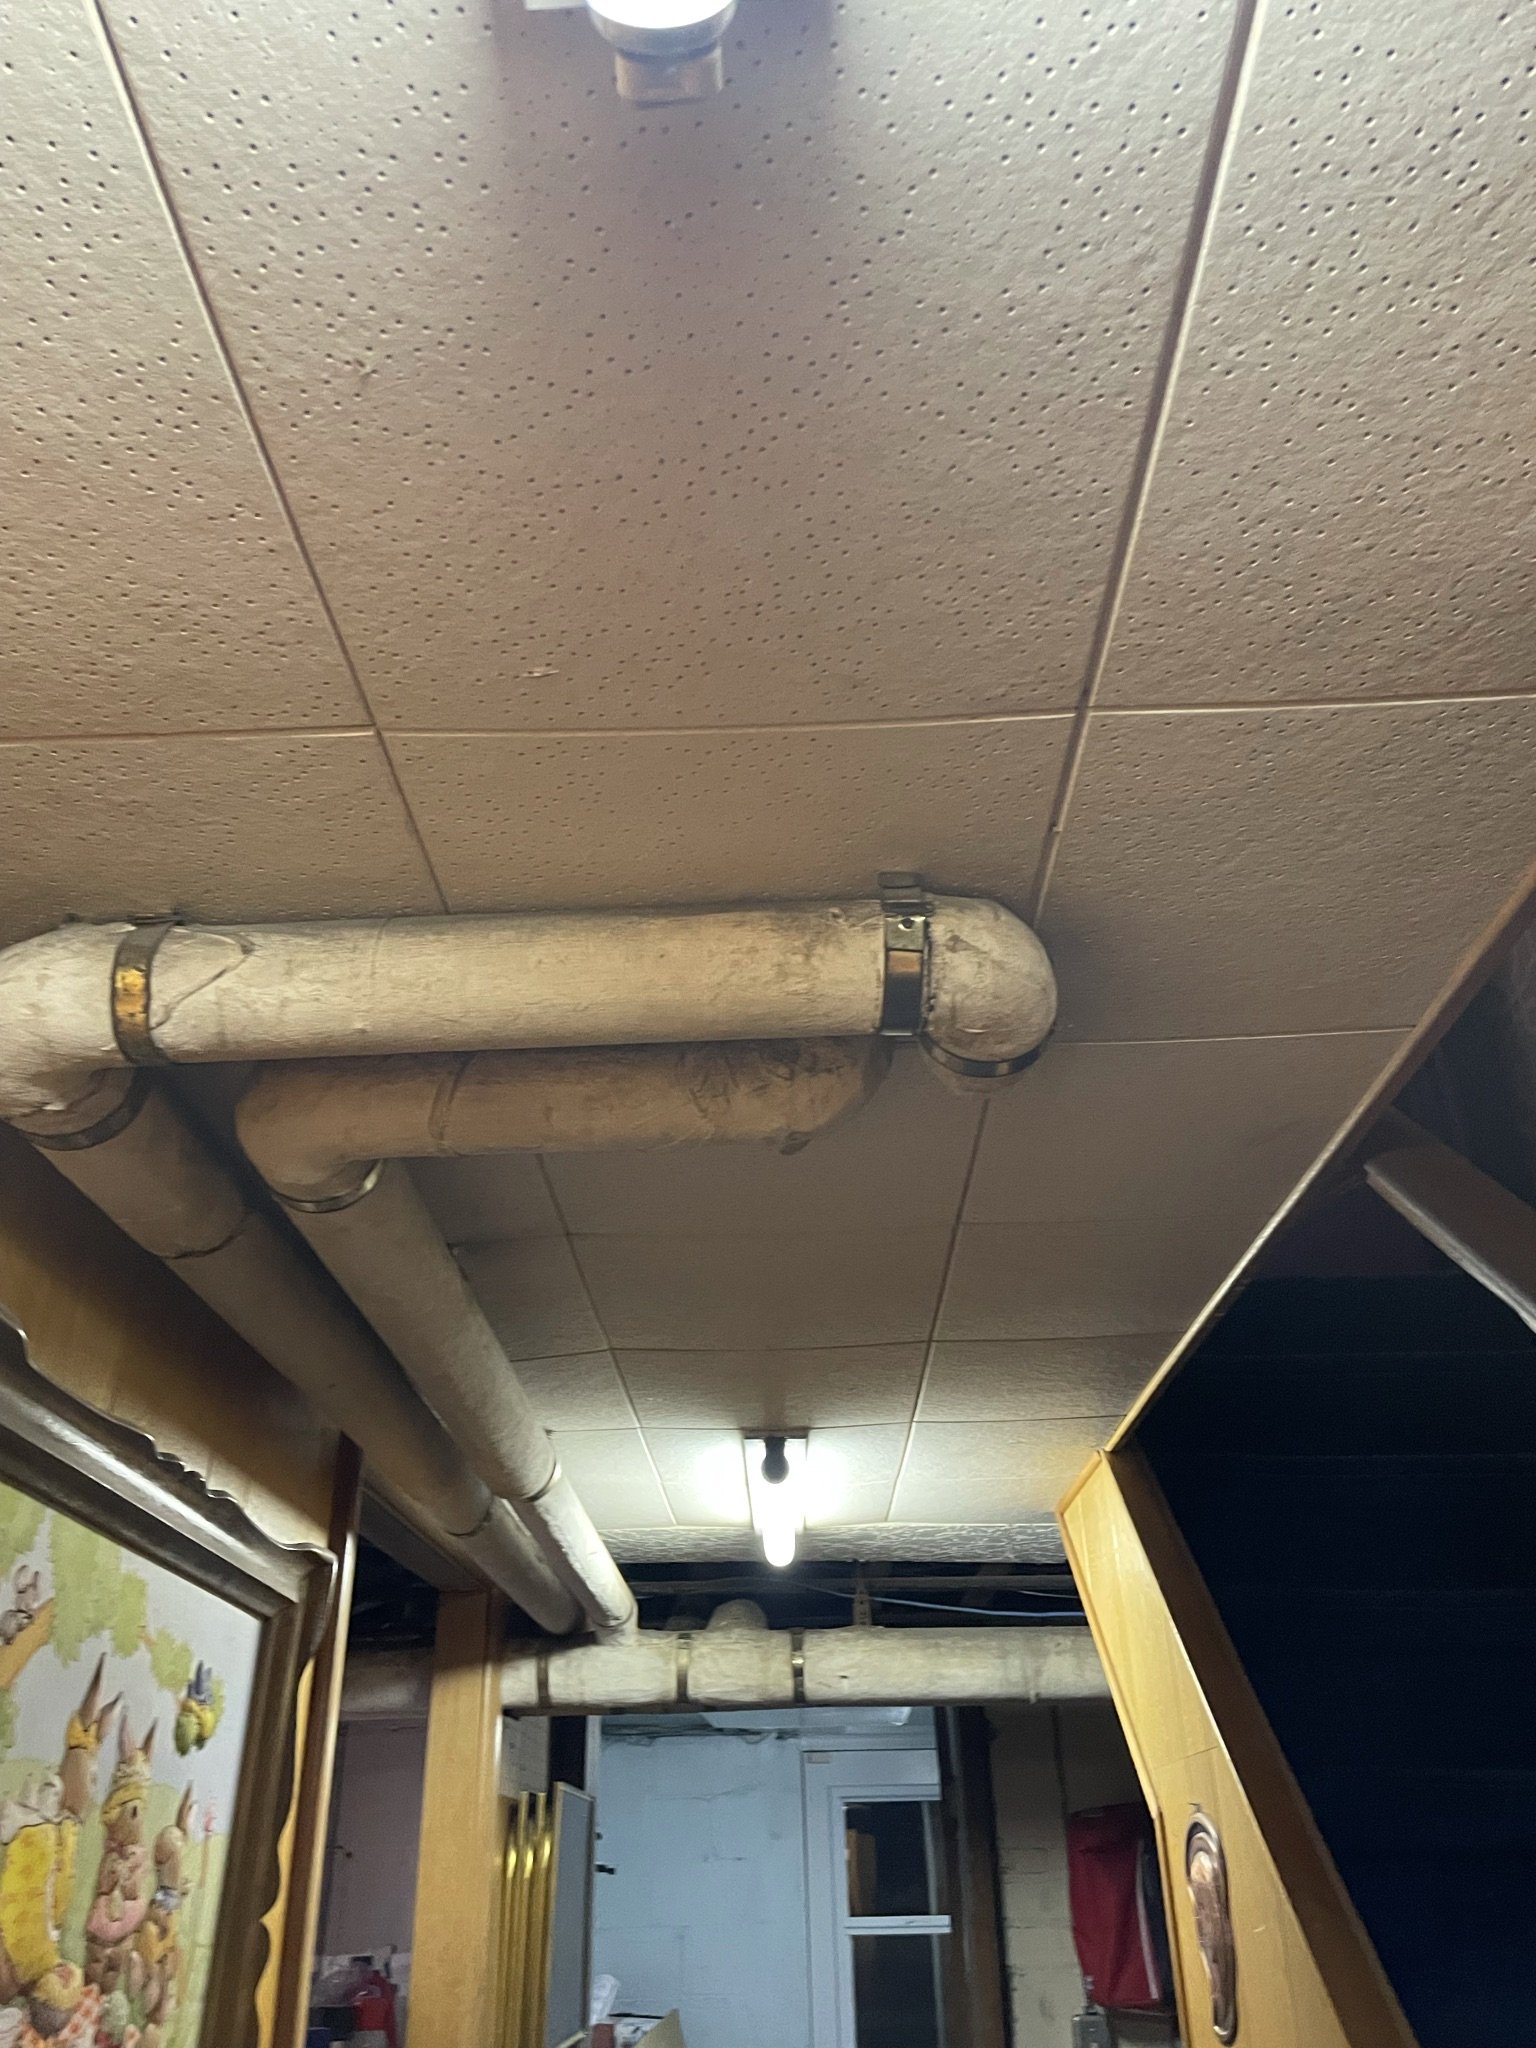 Asbestos Ceiling Tiles And Pipes